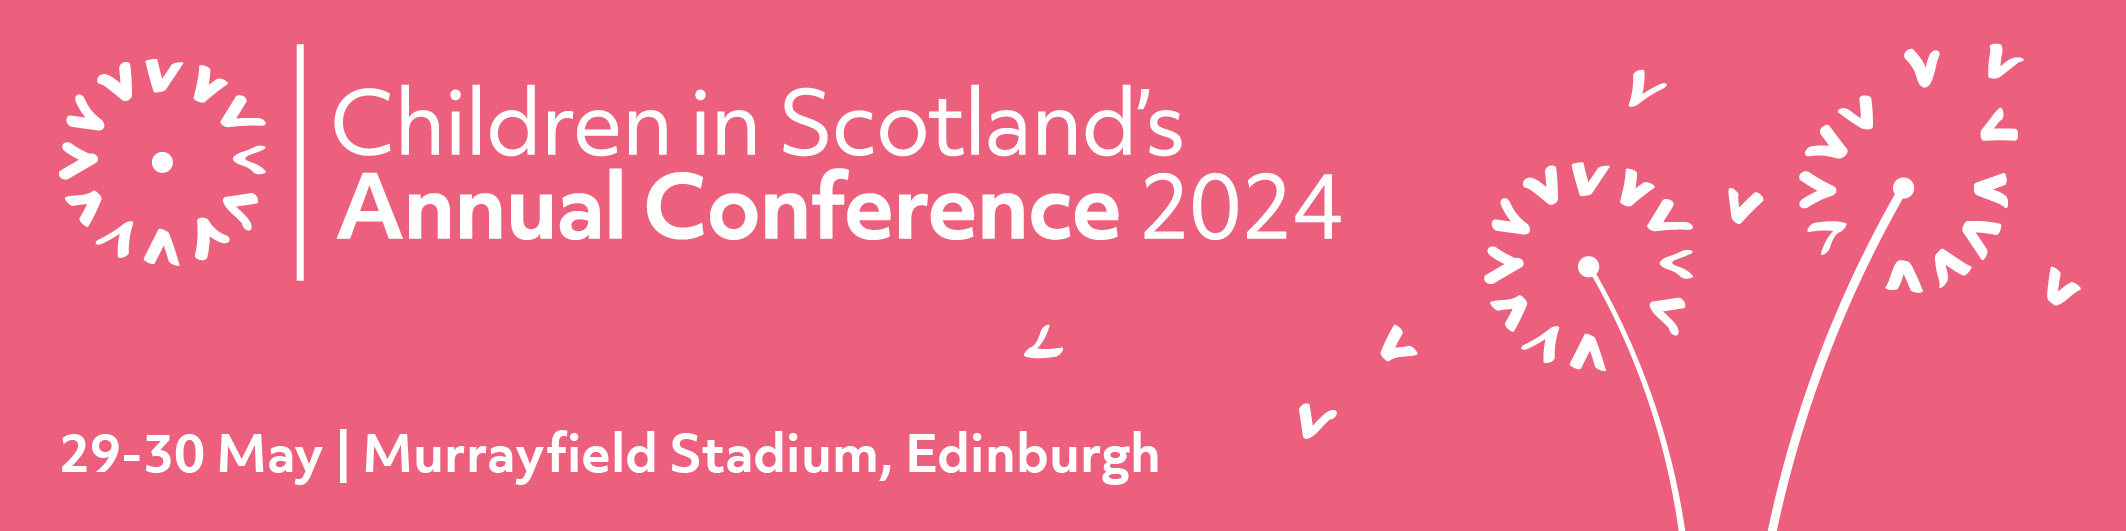 Children in Scotland's Annual Conference 2024. 29-30 May 2024 Murrayfield Stadium, Edinburgh. White text on pink background with dandelion puff motif.